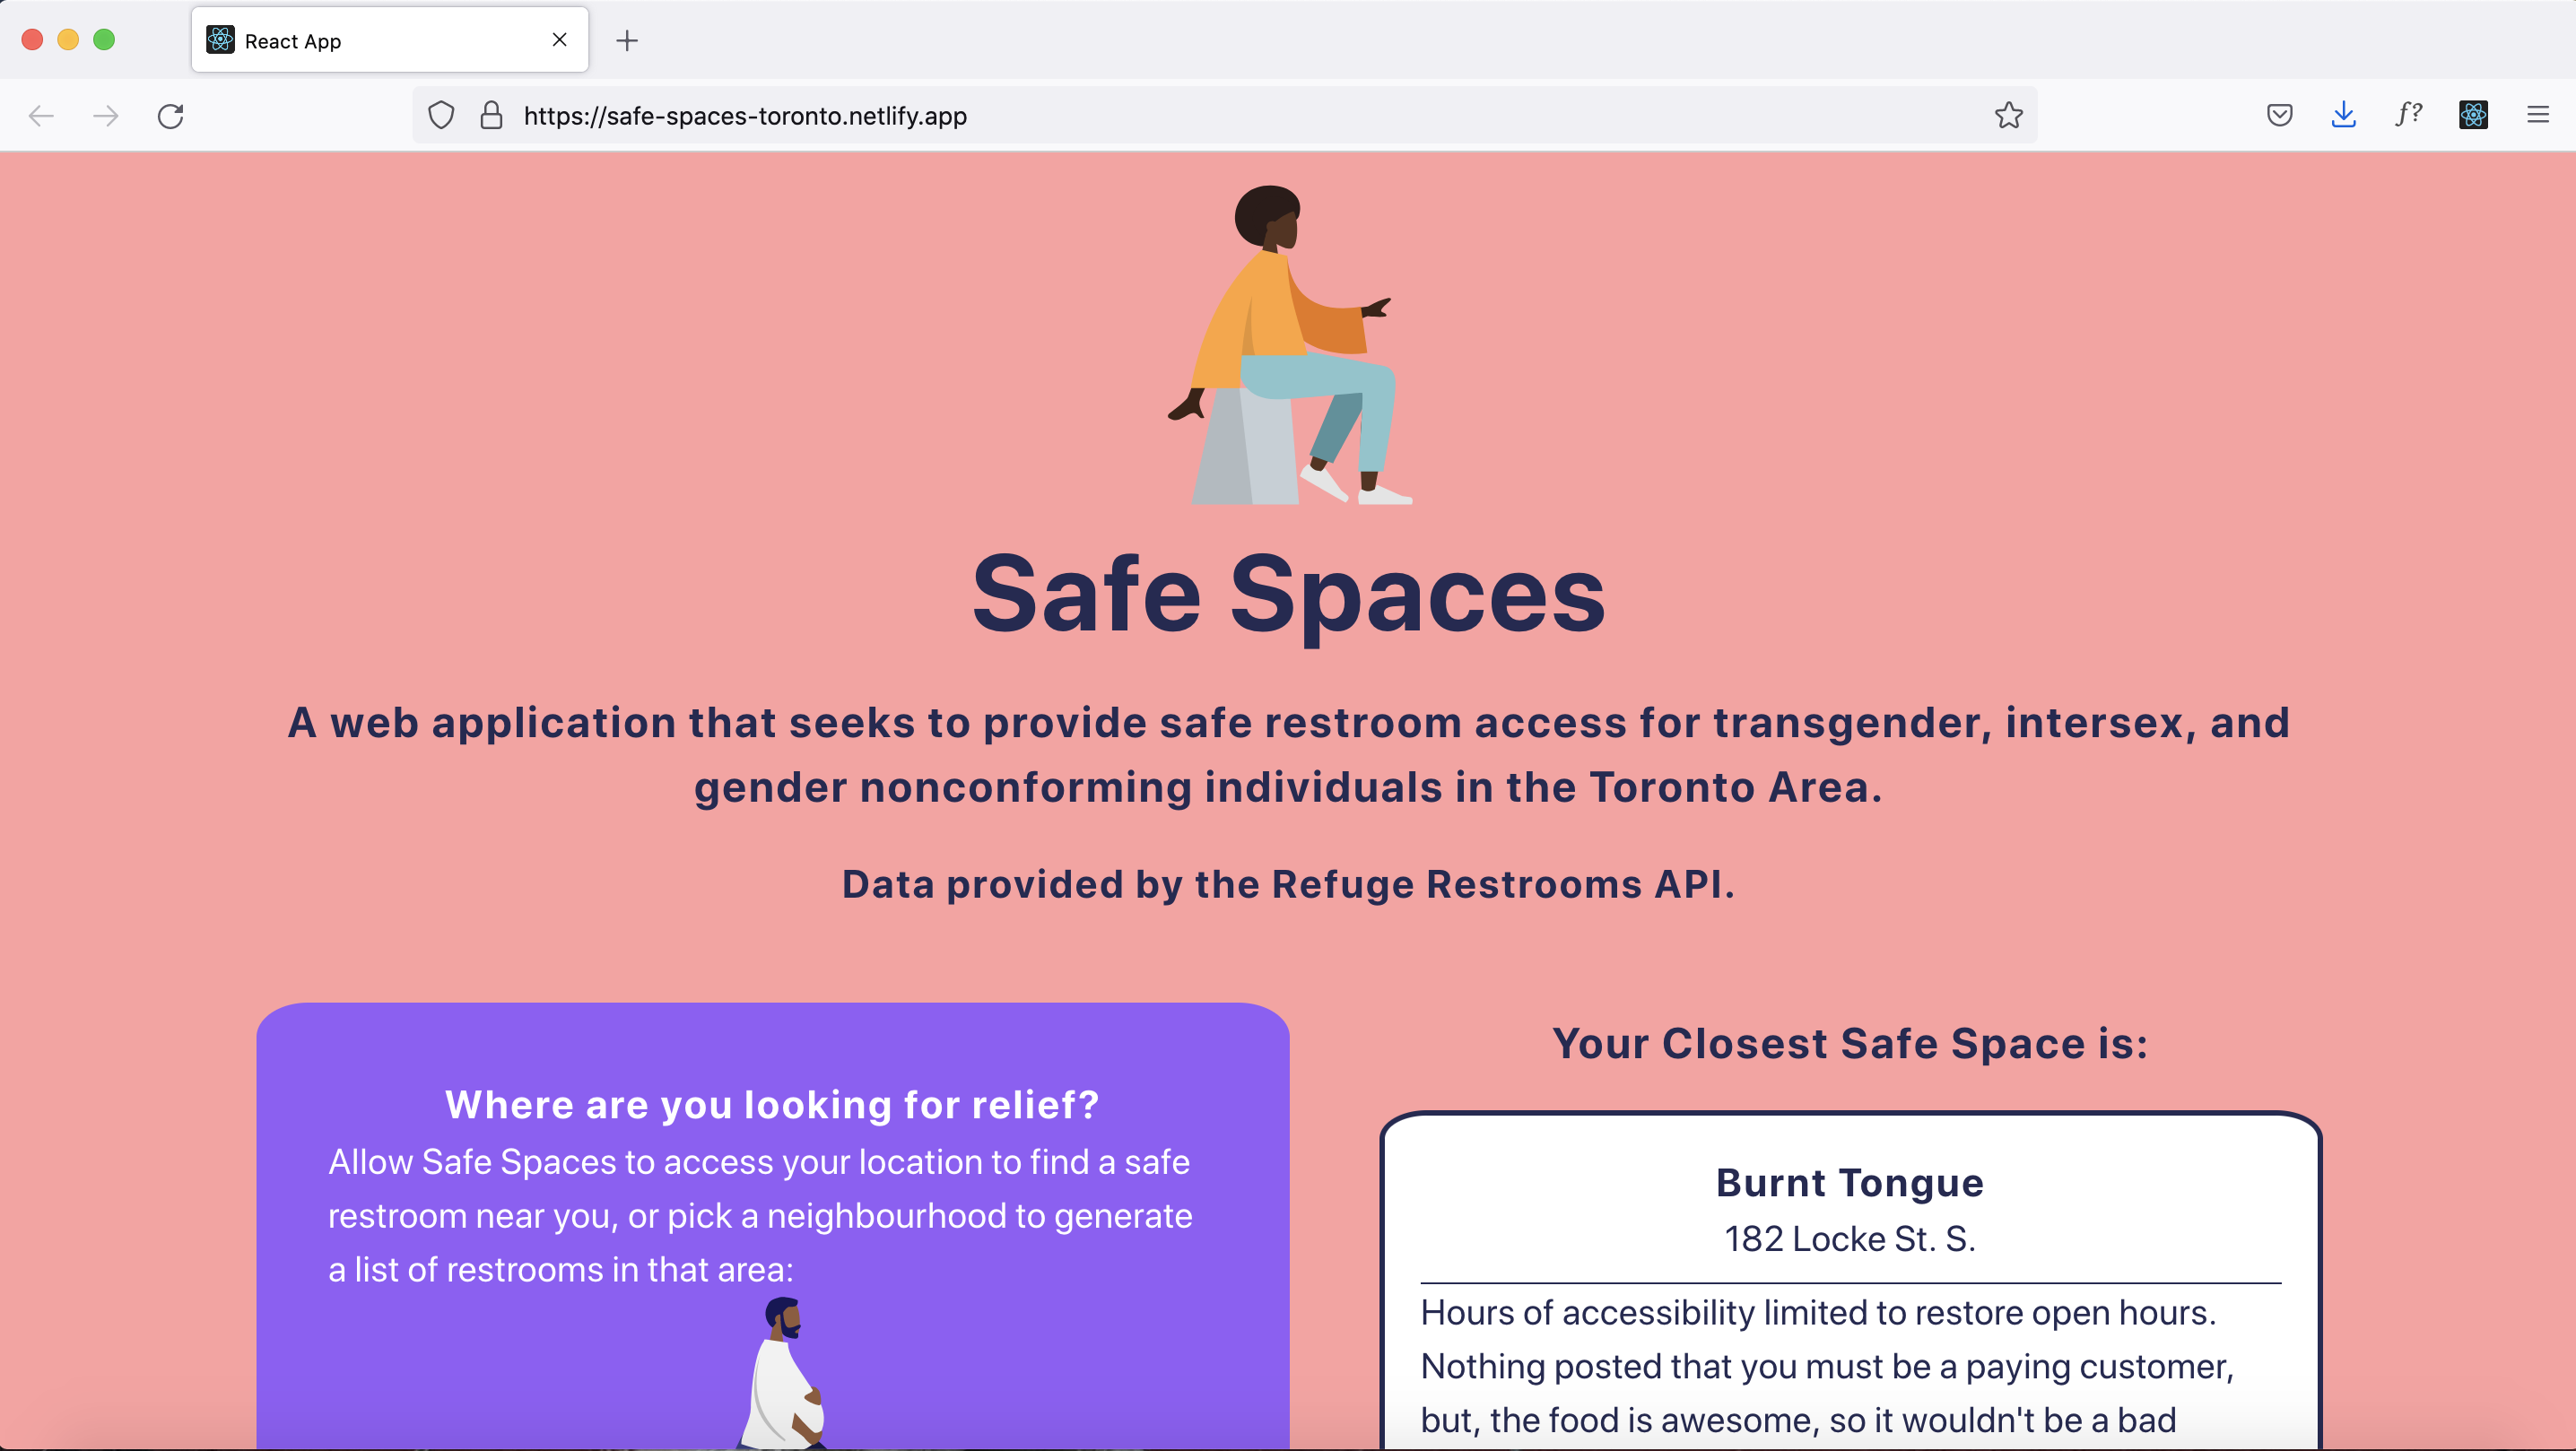 The Safe Spaces App